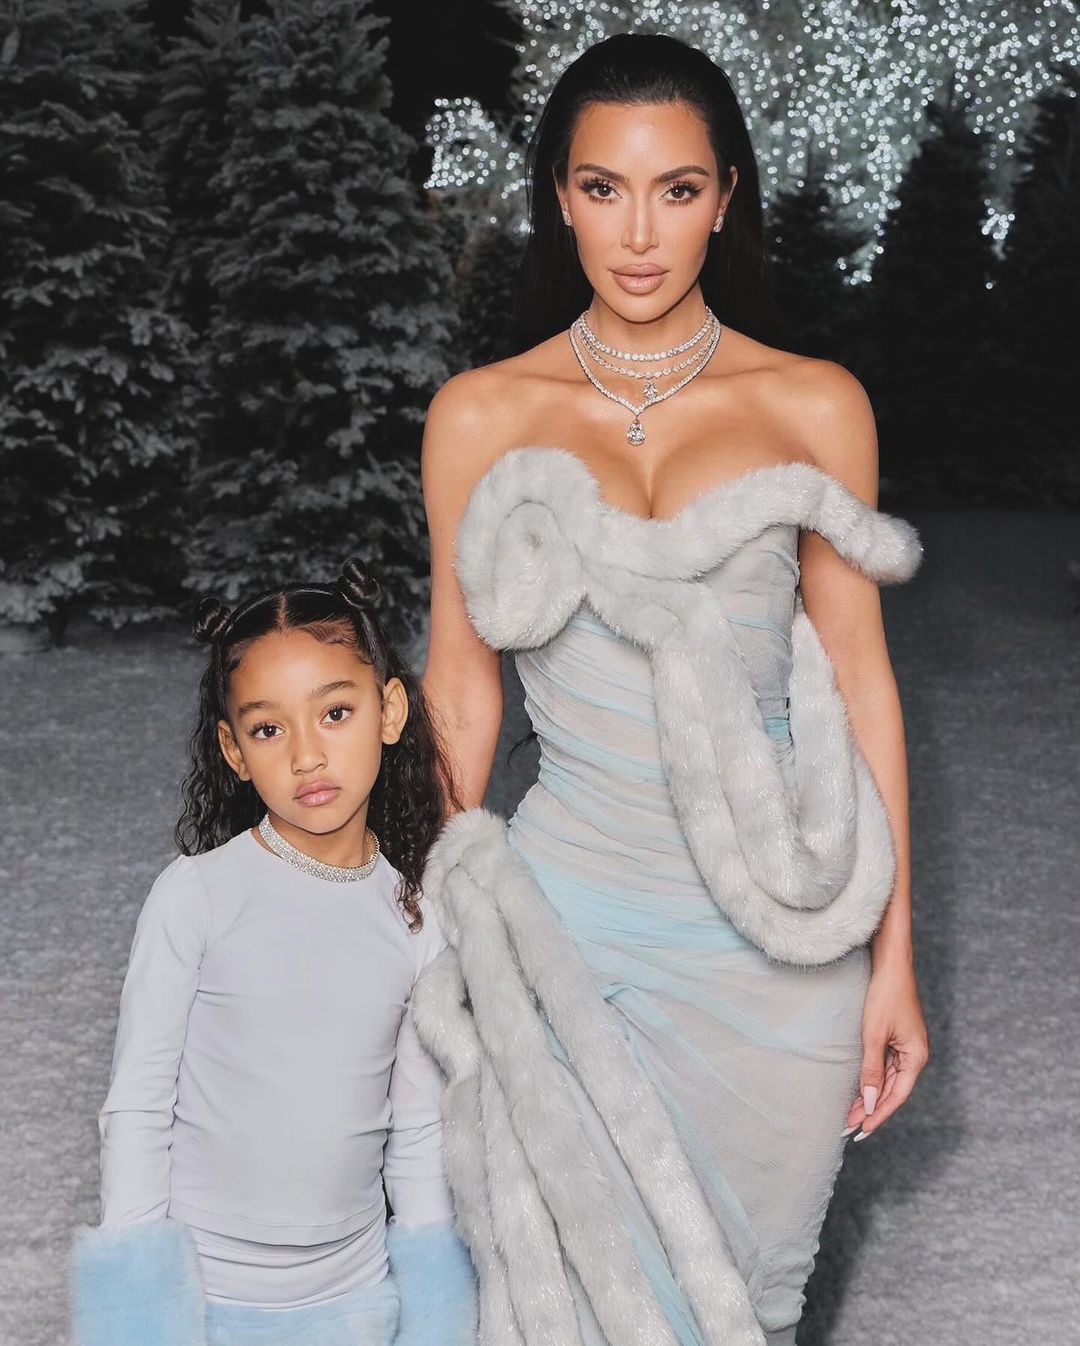 Kim and North prepared for the Kardashian-Jenner annual Christmas Eve party